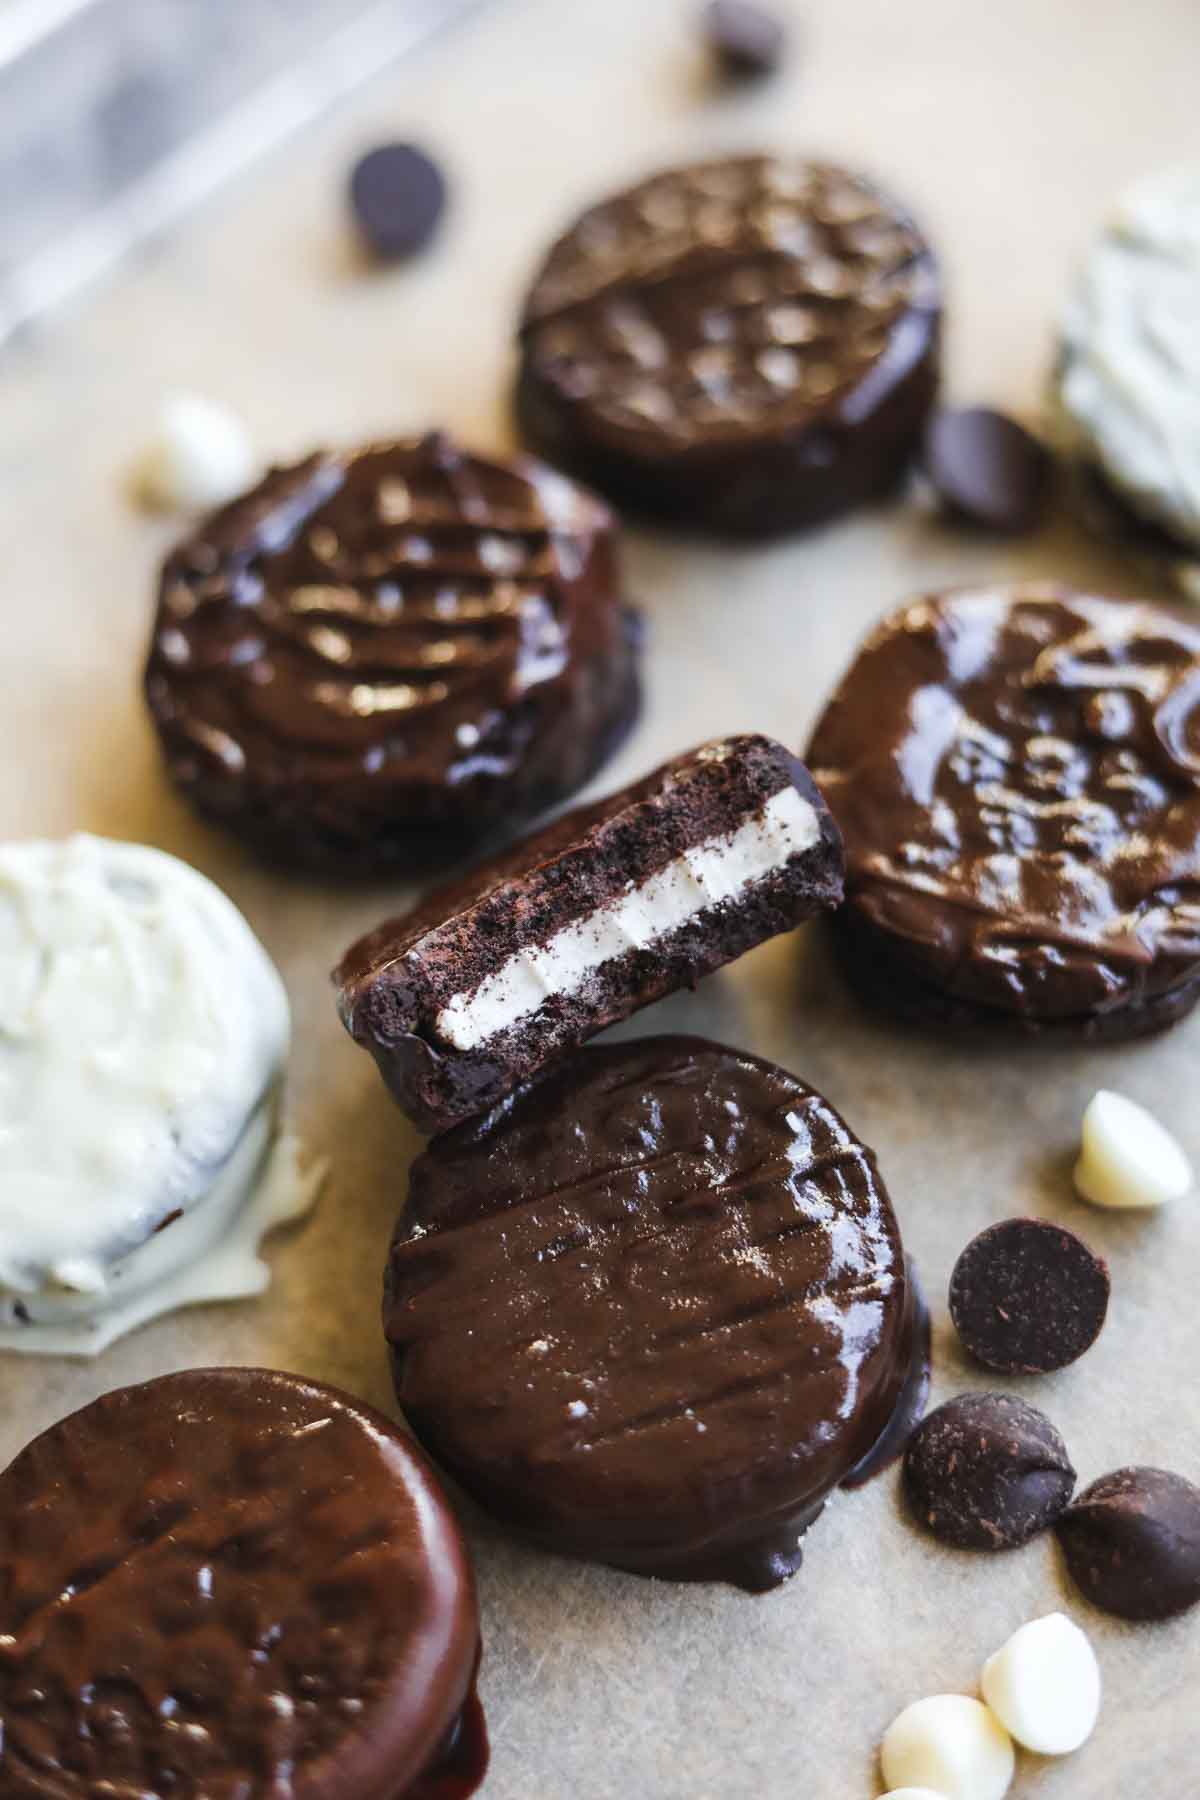 Chocolate-covered Oreos on parchment paper with chocolate chips and white chocolate chips.